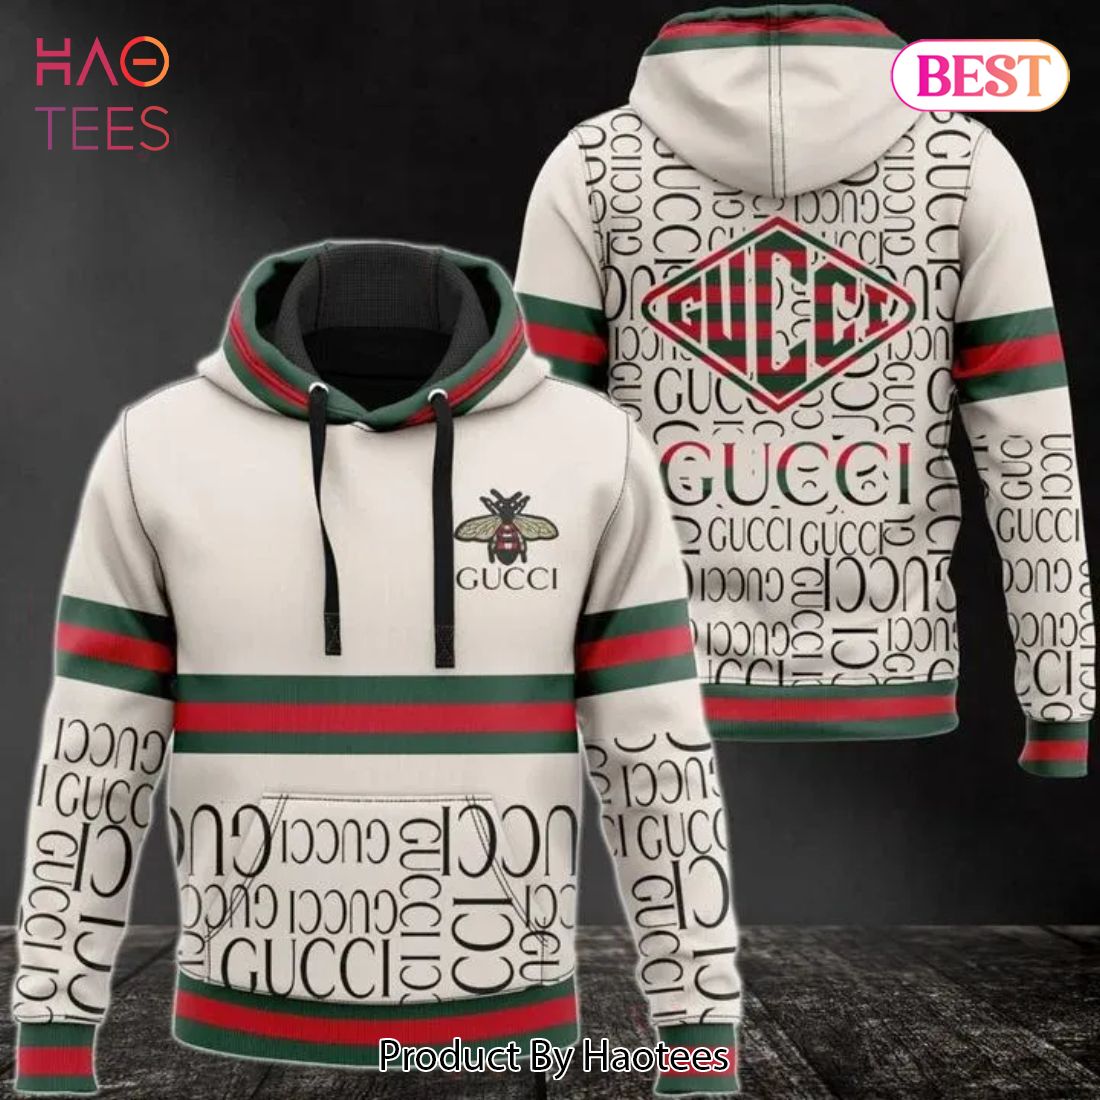 BEST FASHION] Gucci Bee Unisex Hoodie For Men Women Luxury Brand Clothing  Clothes Outfit